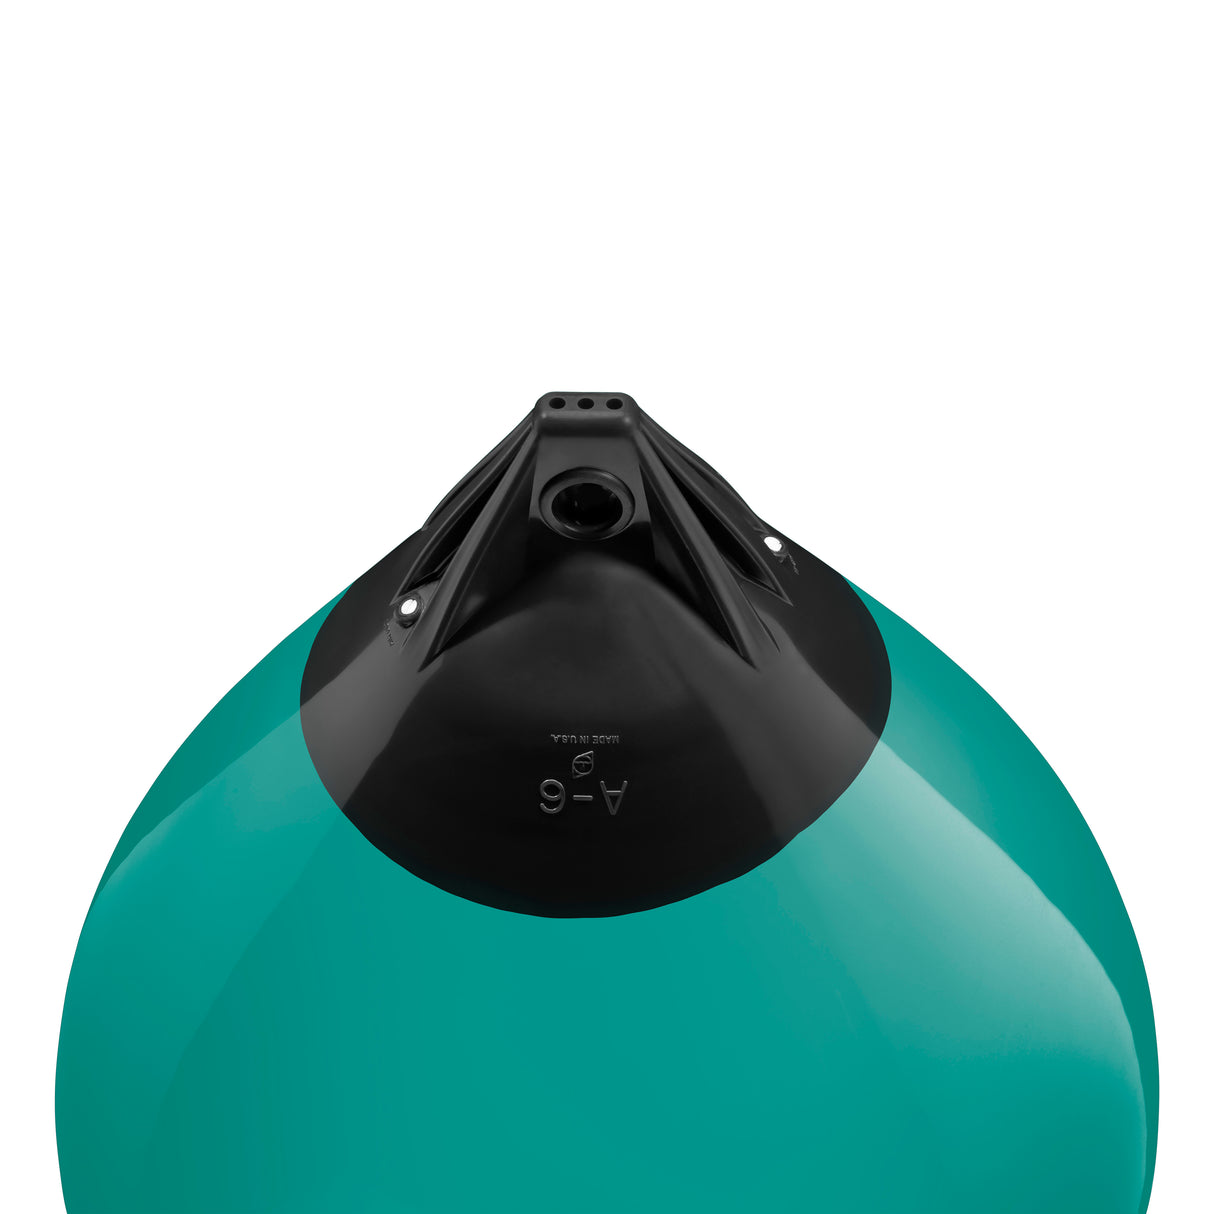 Teal buoy with Black-Top, Polyform A-6 angled shot